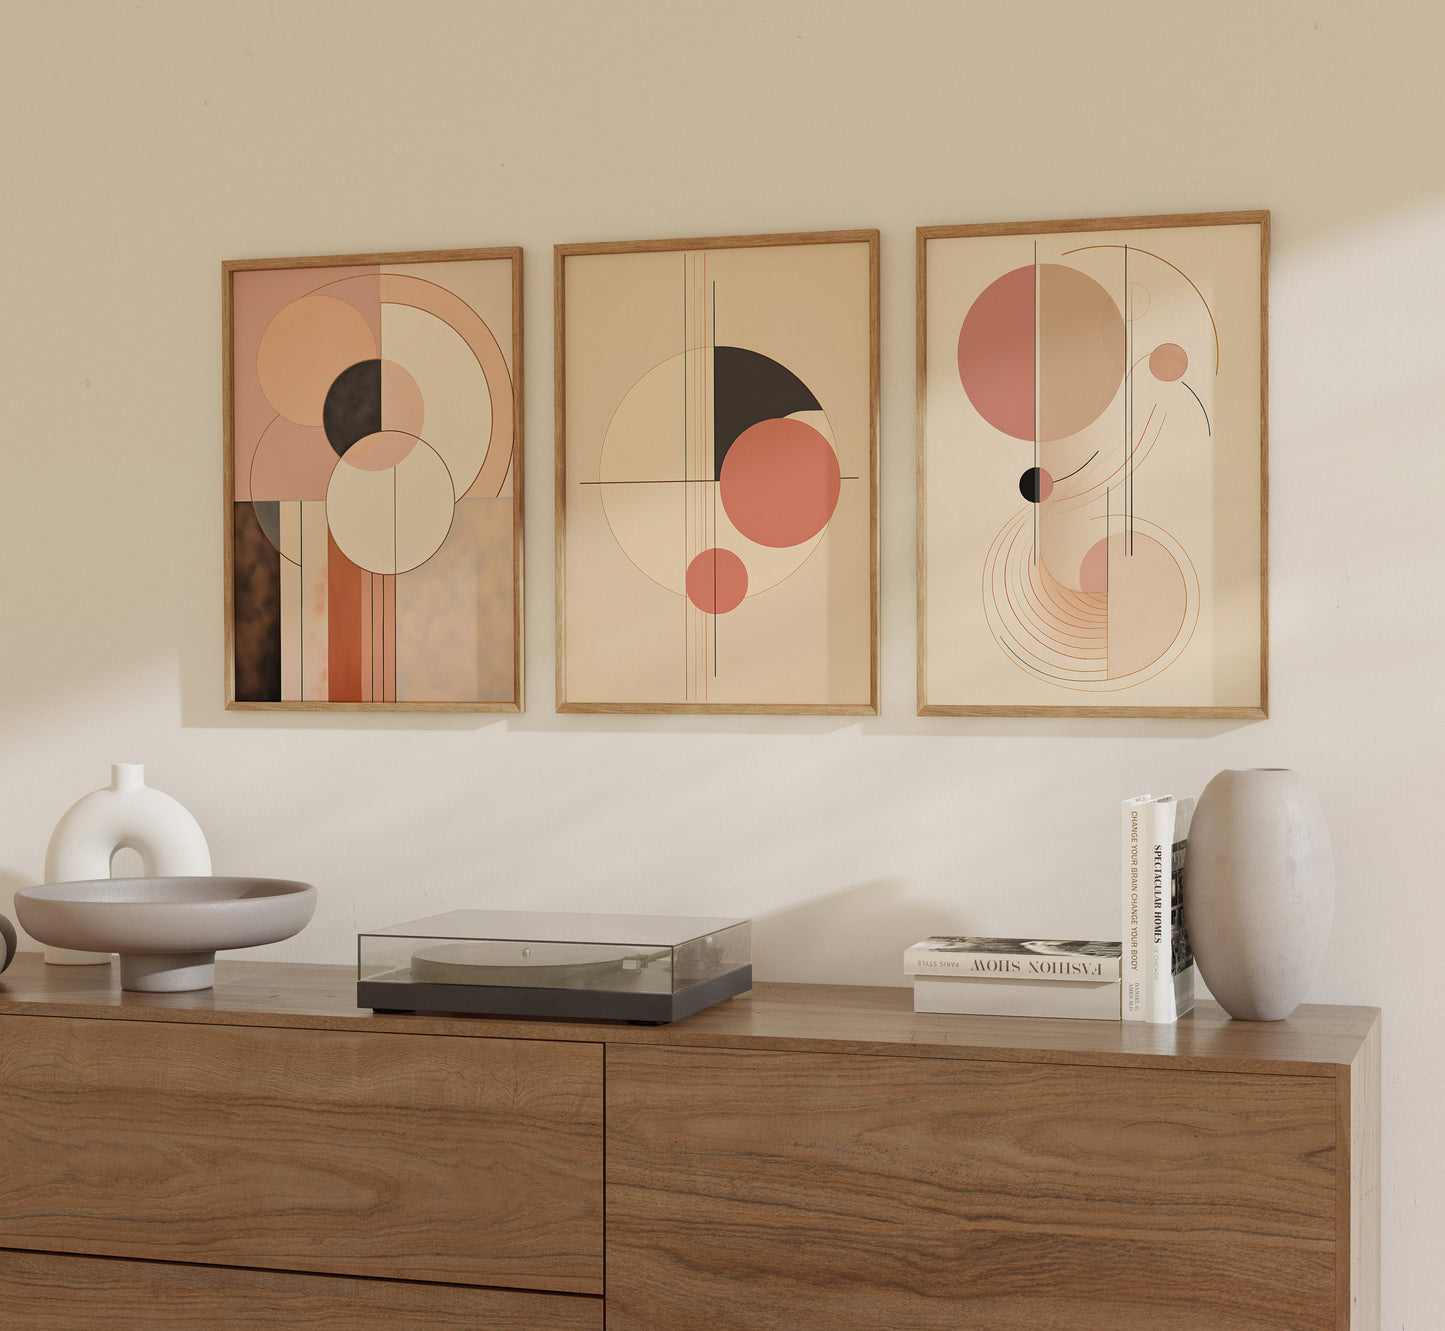 Three abstract art prints in warm tones hanging above a wooden sideboard.